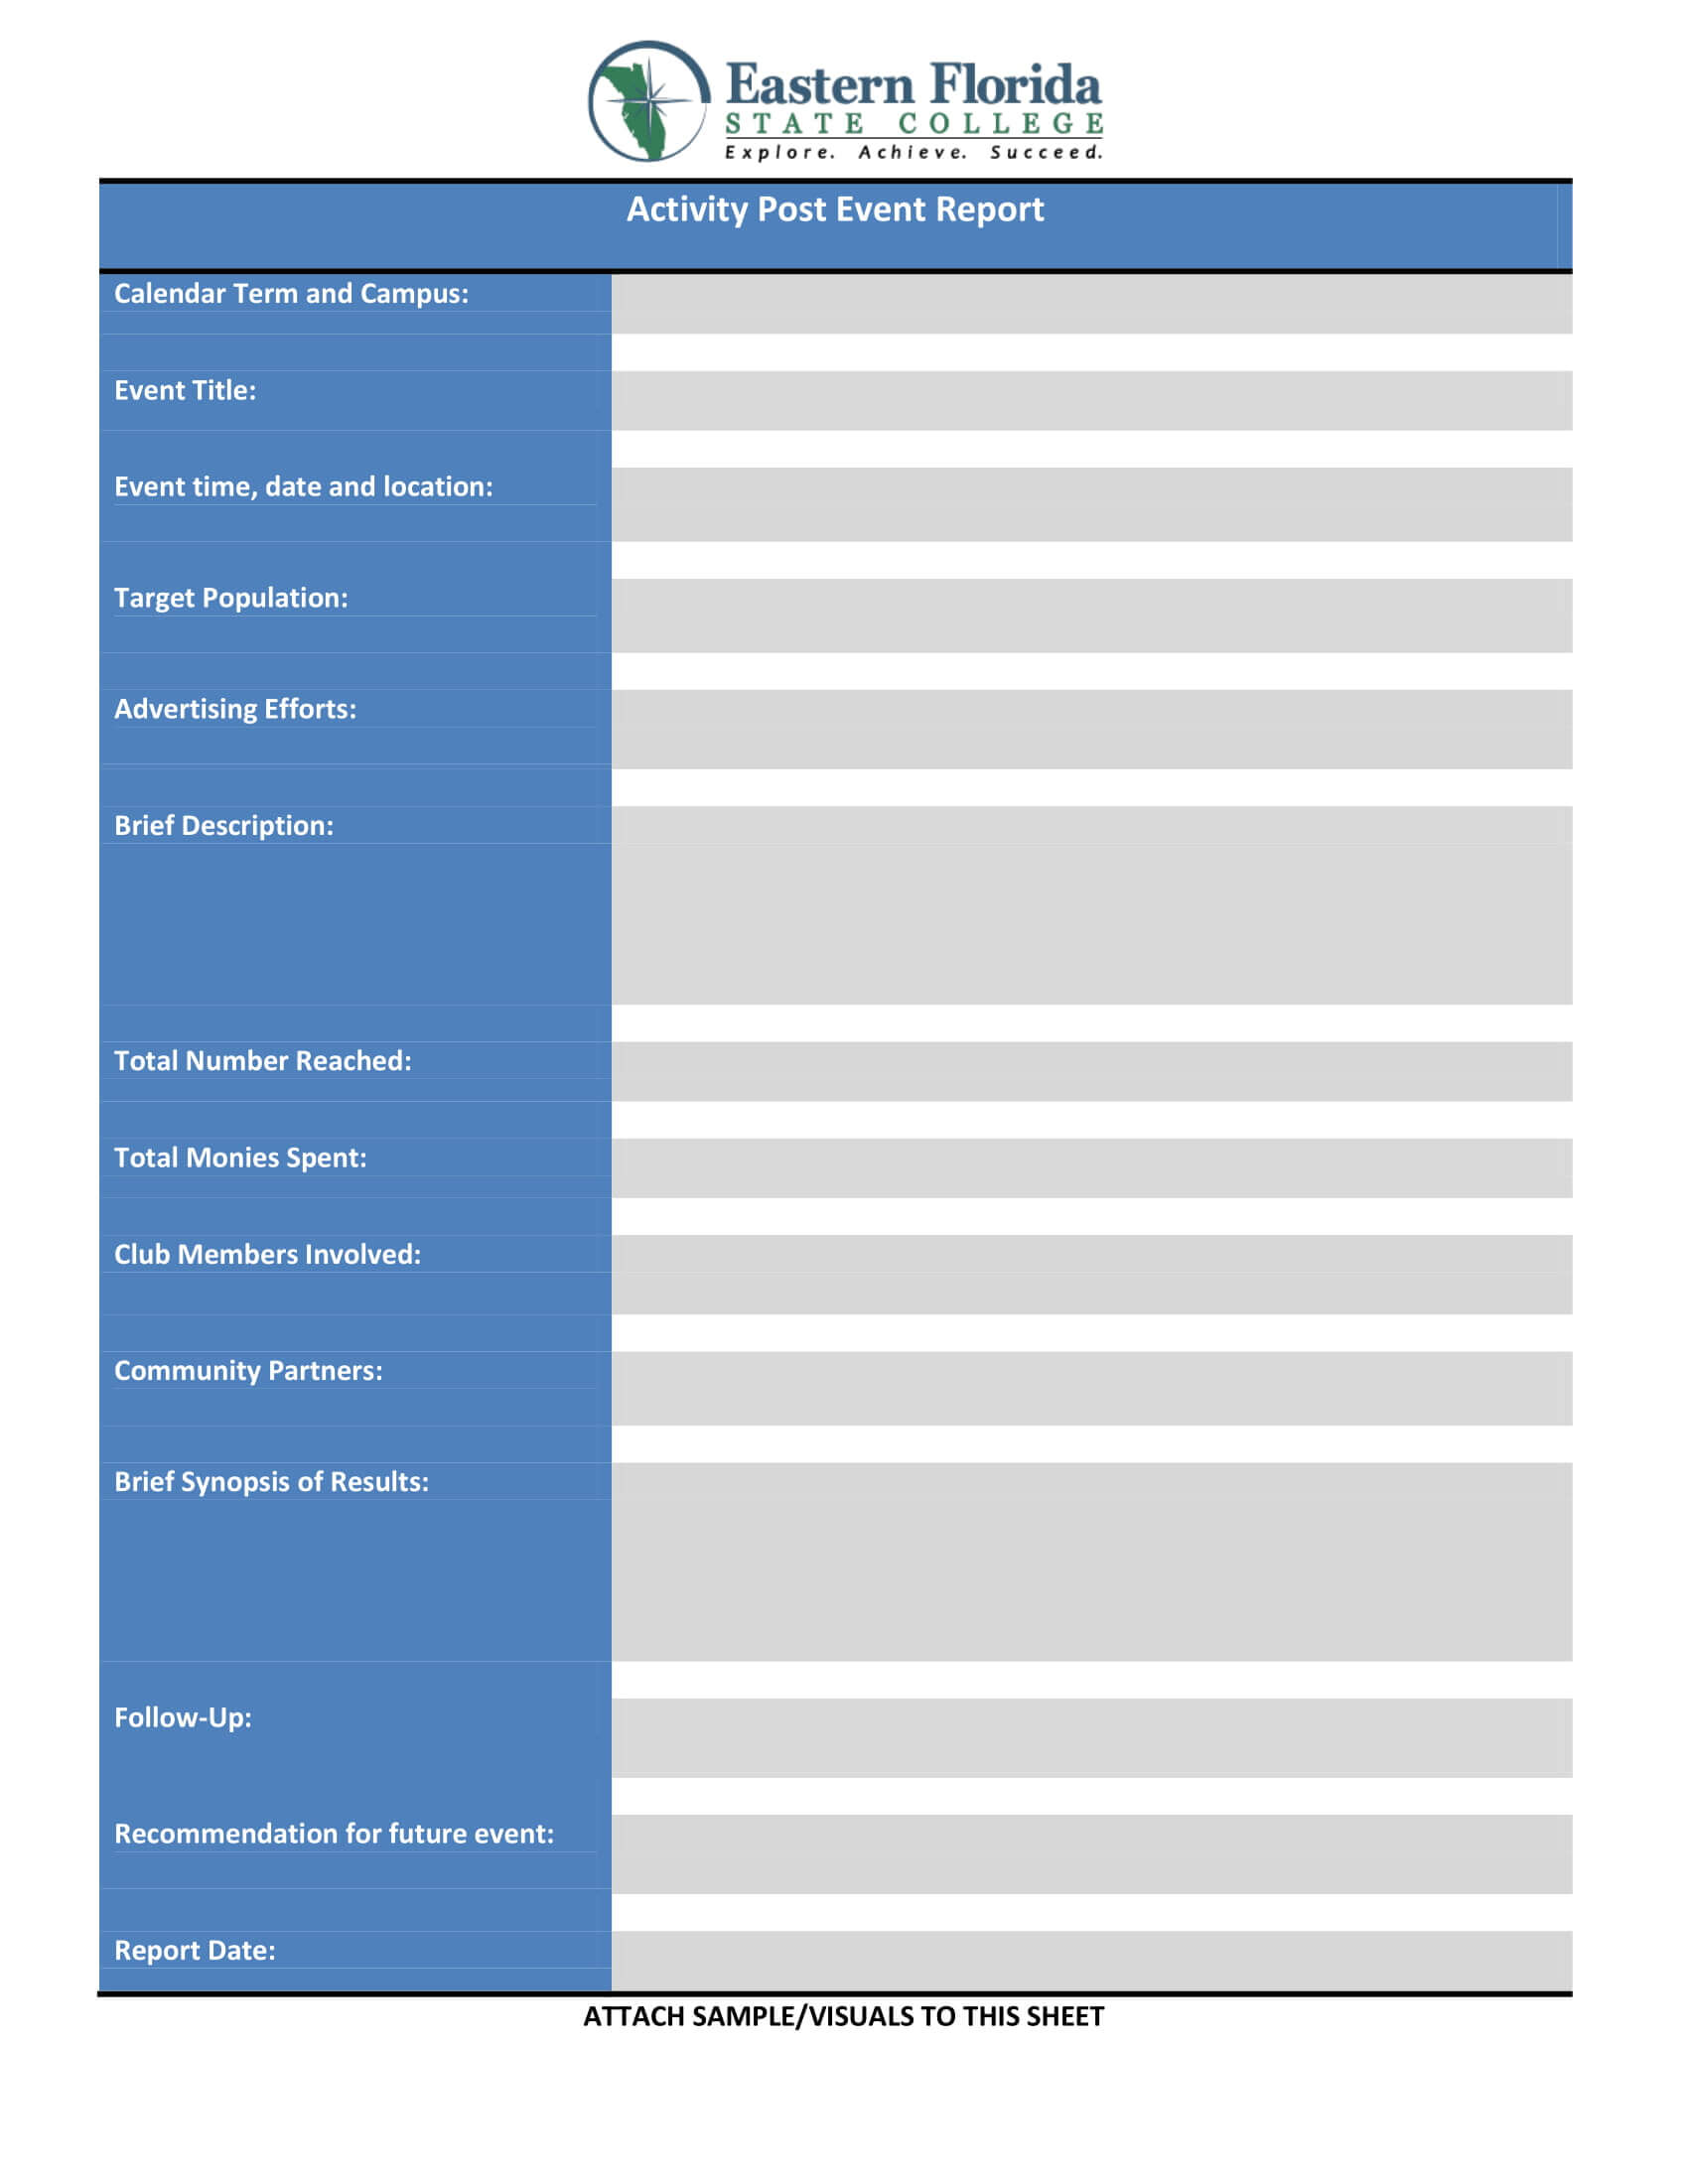 After Event Report Template - Atlantaauctionco Pertaining To After Event Report Template